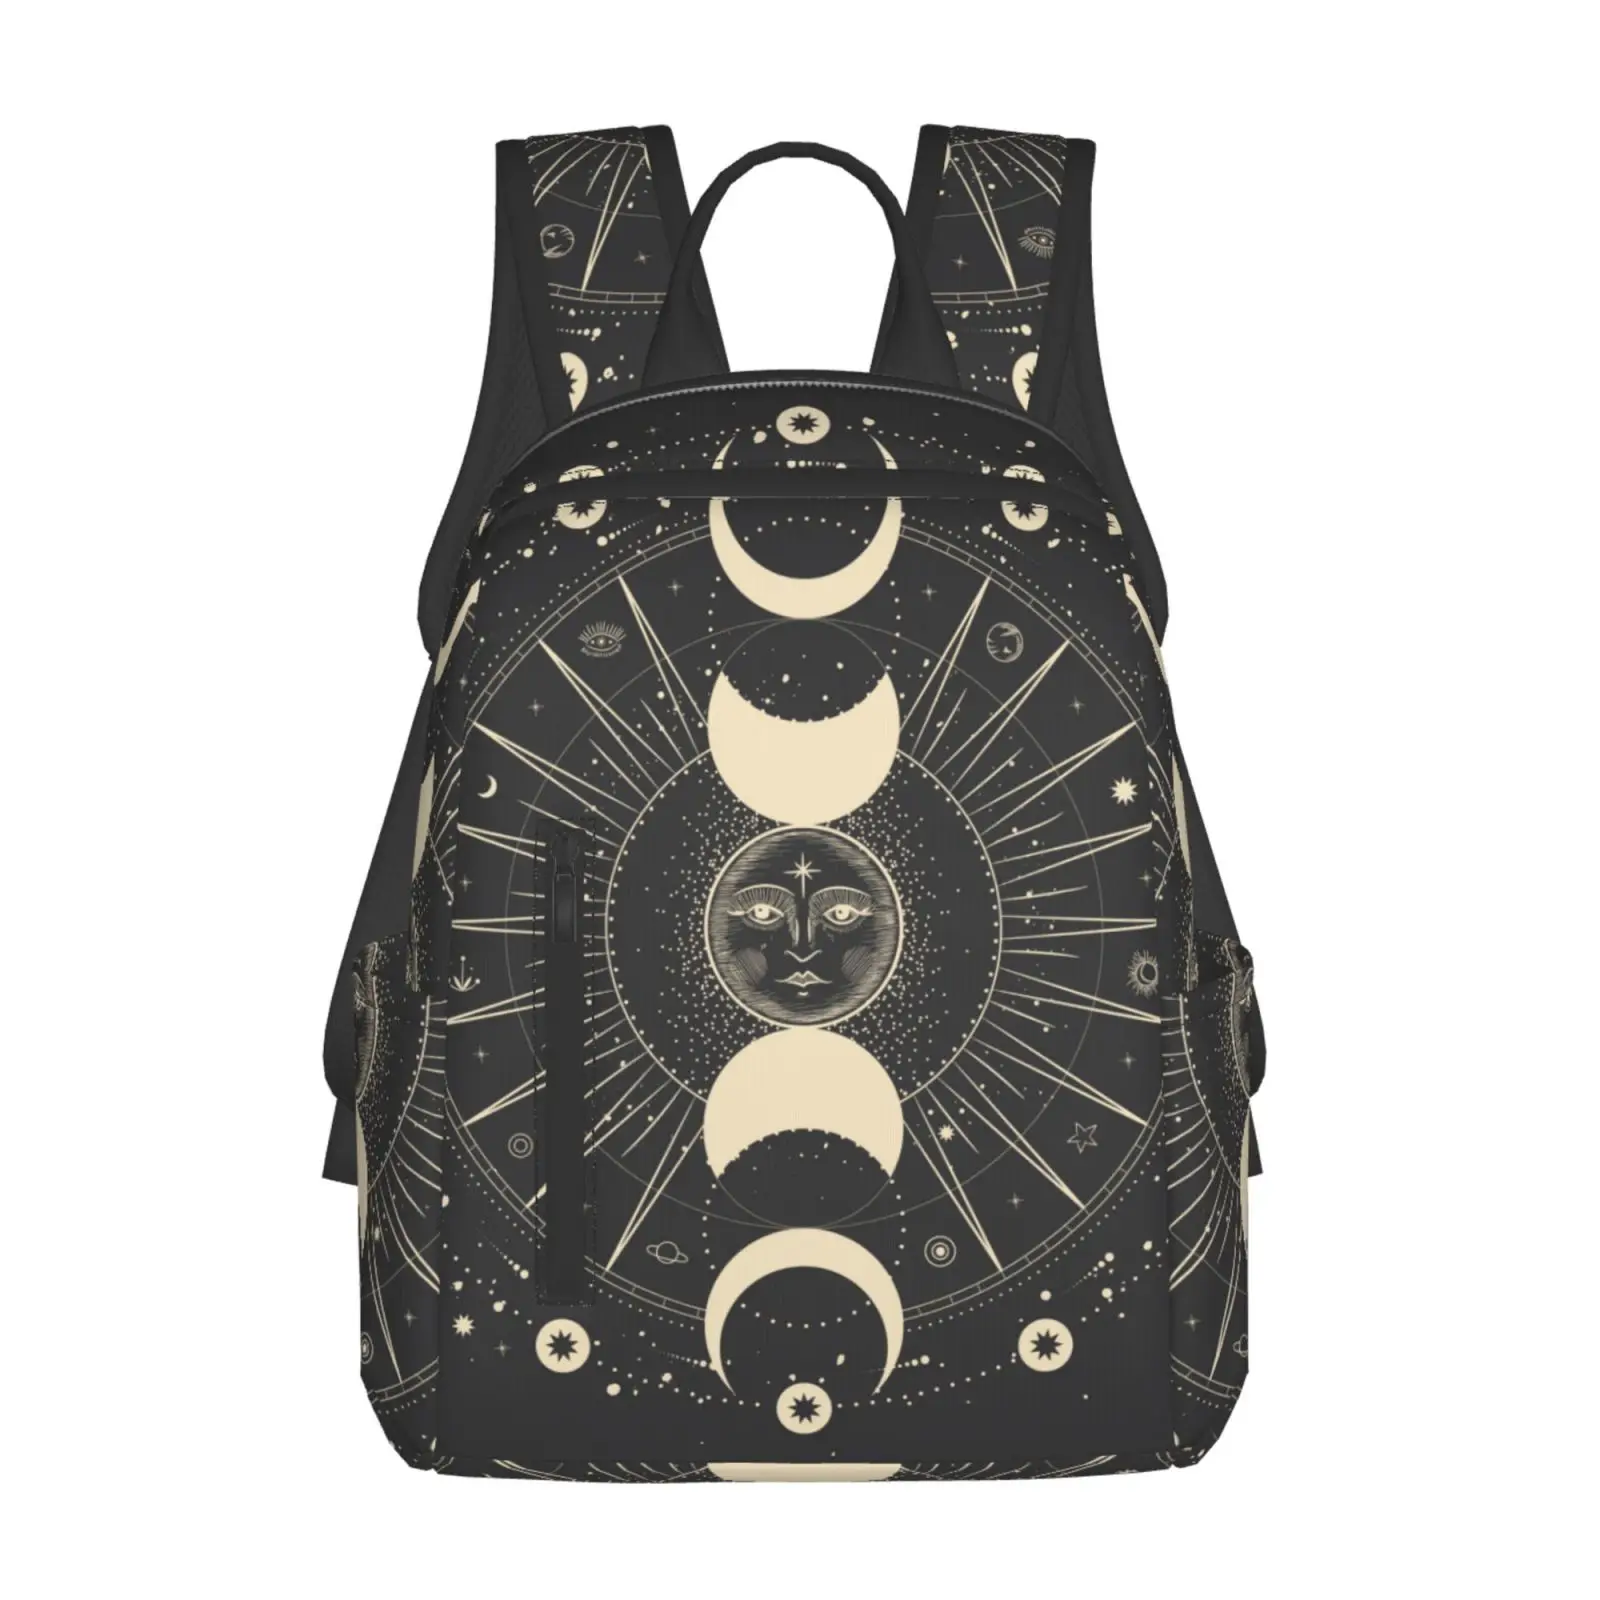 Moon Star Mystic Sun Astrology Tarot Goth Casual Backpack Unisex Outdoor Sports Travel Hiking Camping Backpacks Schoolbag